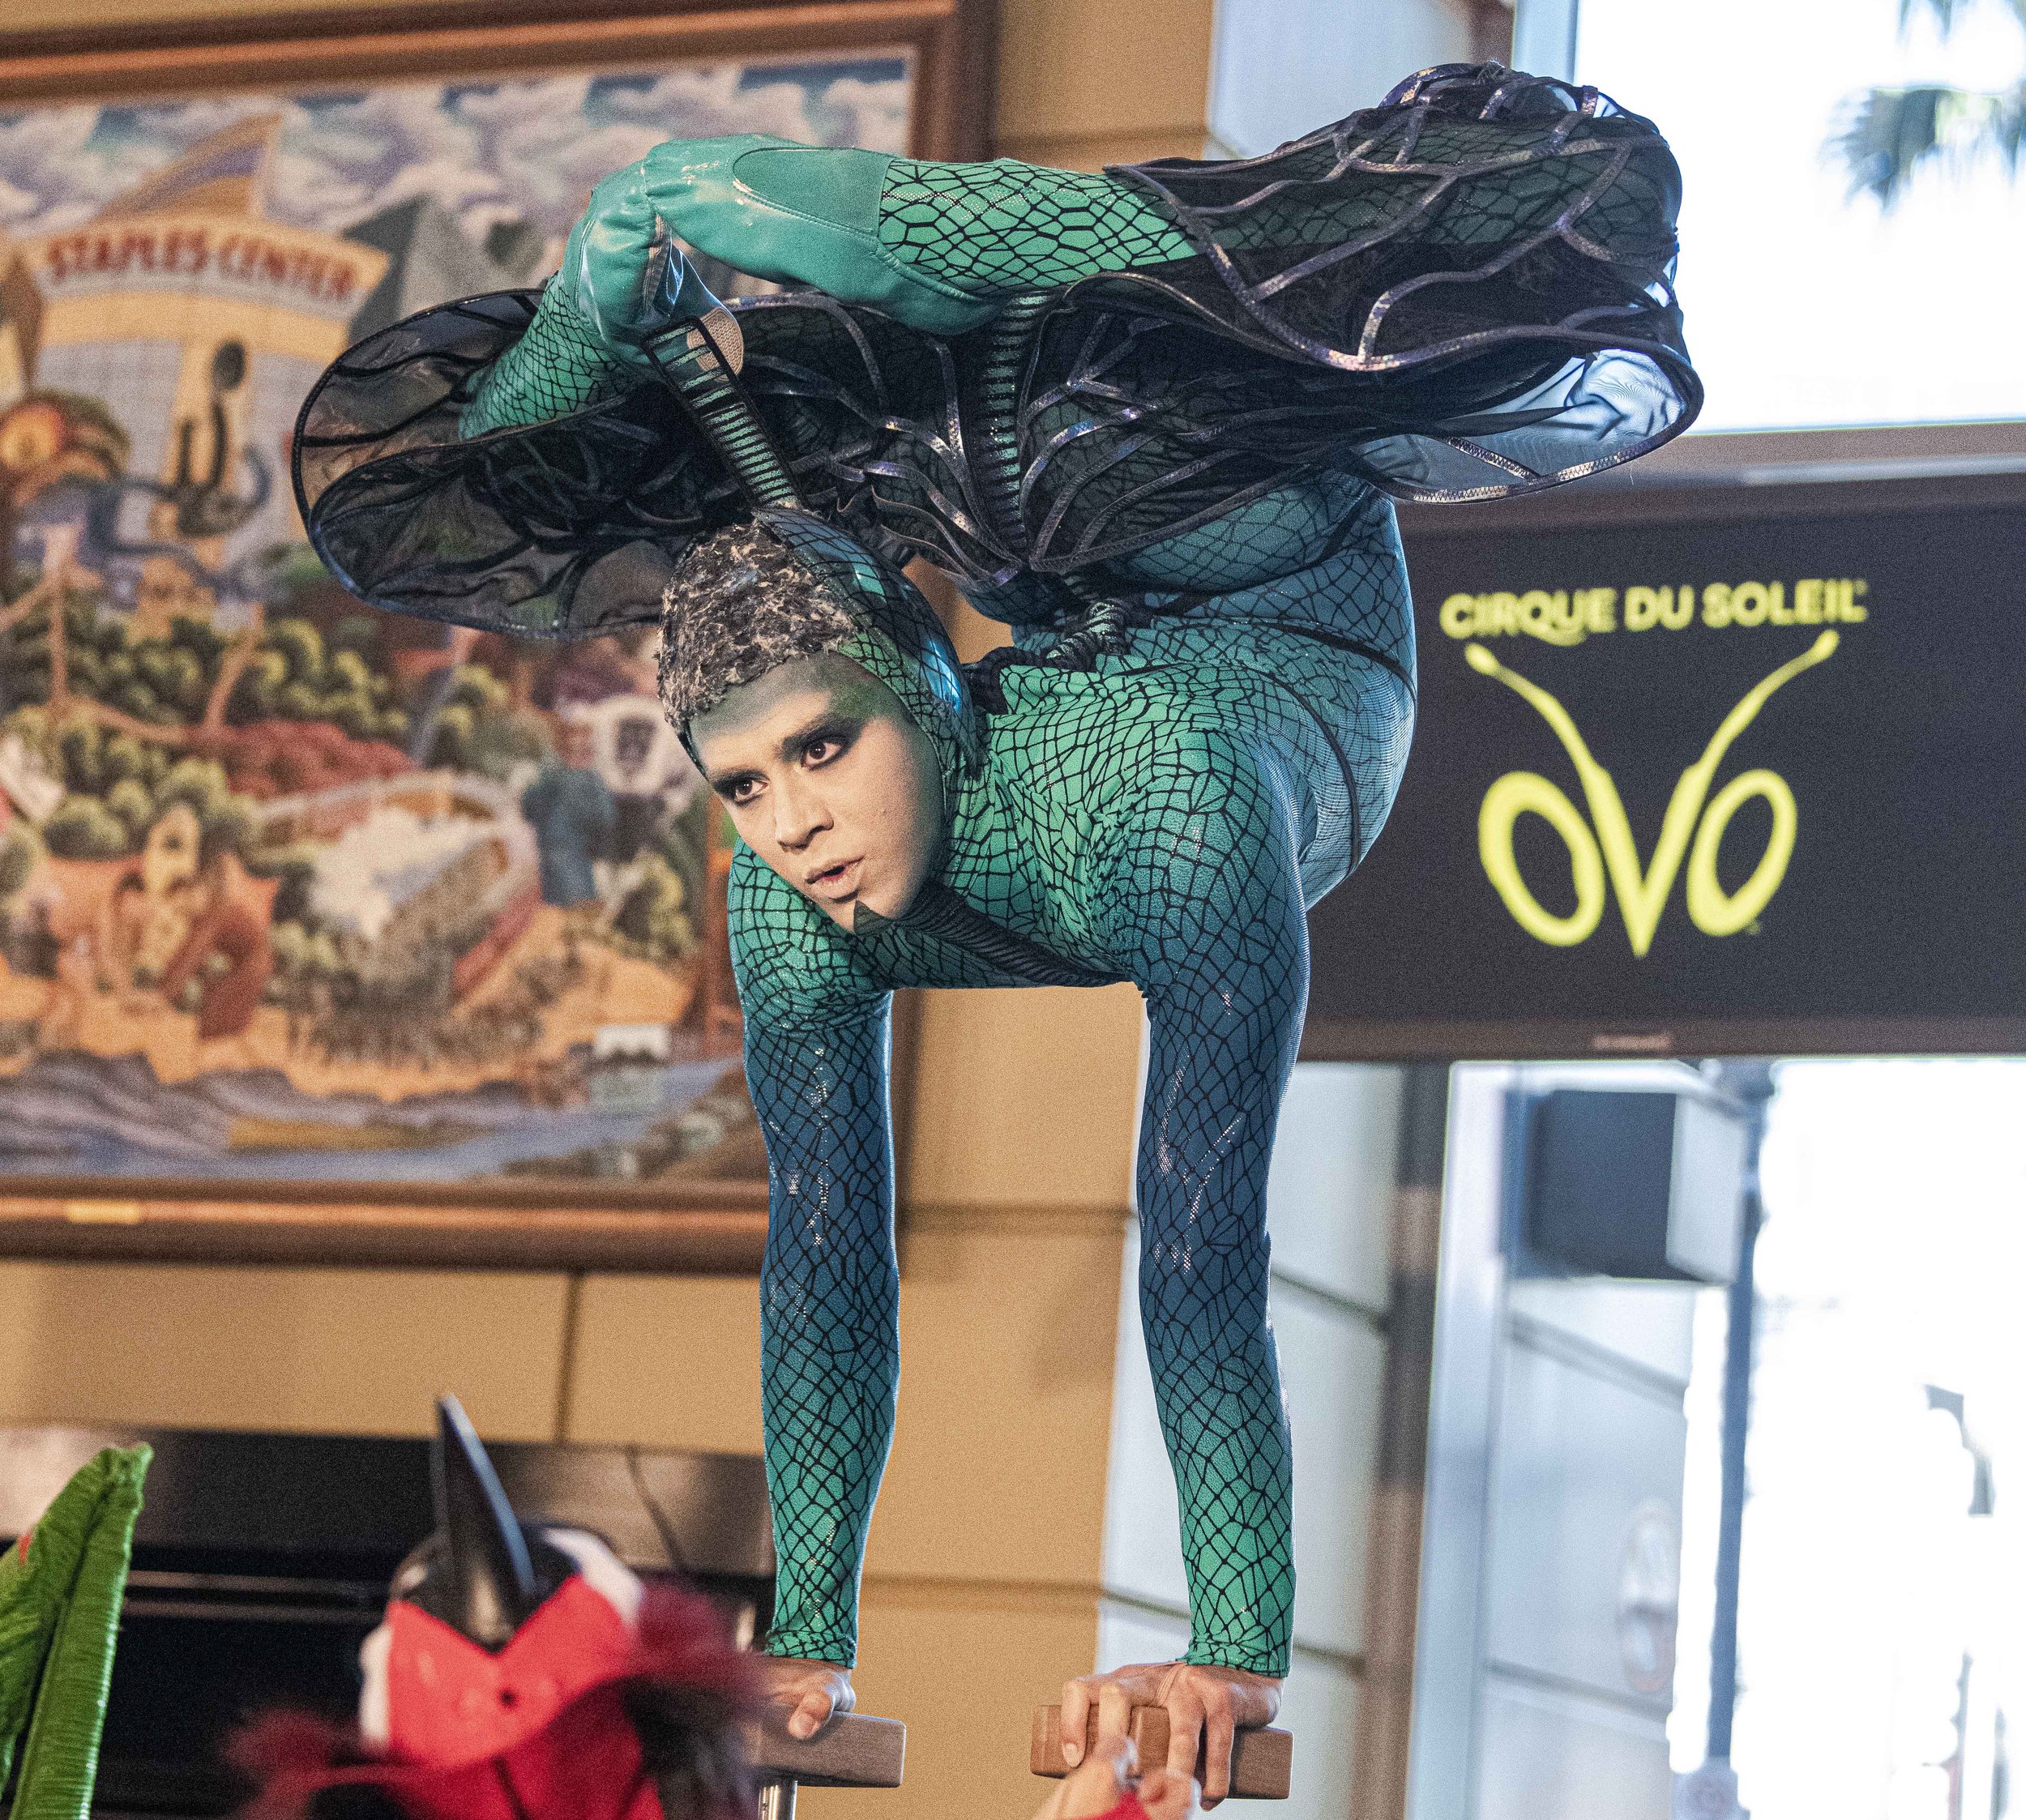  A Cirque du Soliel performer performs a handstand at the press event for the announcement of their new partnership with OVO entertainment group at the Staples Center located in Los Angeles, Calif. on Nov. 10, 2021. (Jon Putman | The Corsair) 